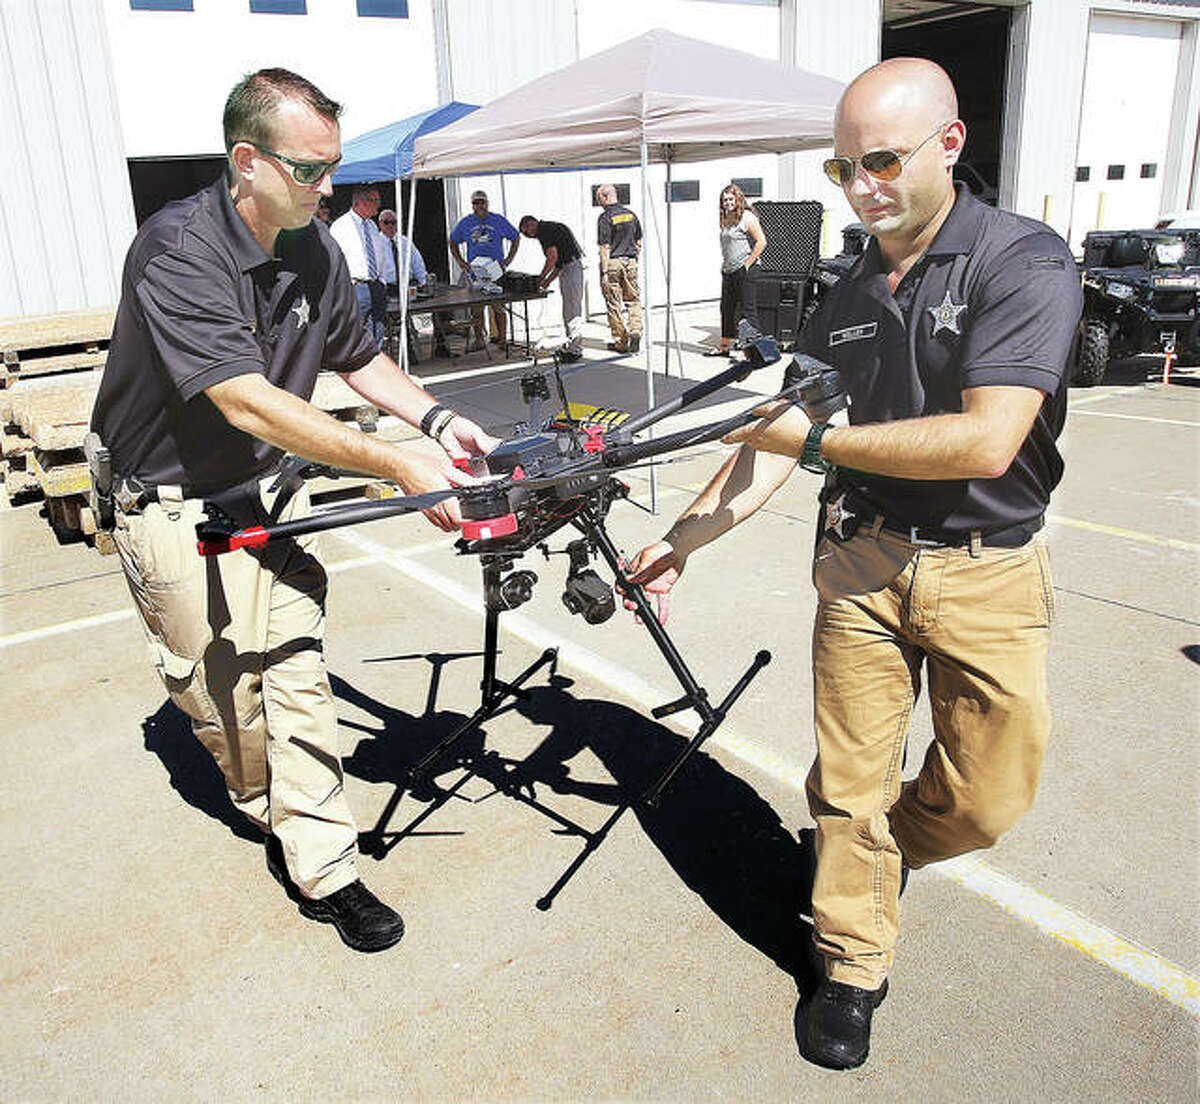 Madison County Sheriff’s Deputies Darren Onwiler, left, and Bob Weller, right, carry the Sheriff Department’s new drone, which has retractible landing legs, into the clear to launch it Tuesday. While regulations limit the height of flight to 400 feet in the air, the drone is capable of much higher altitudes.